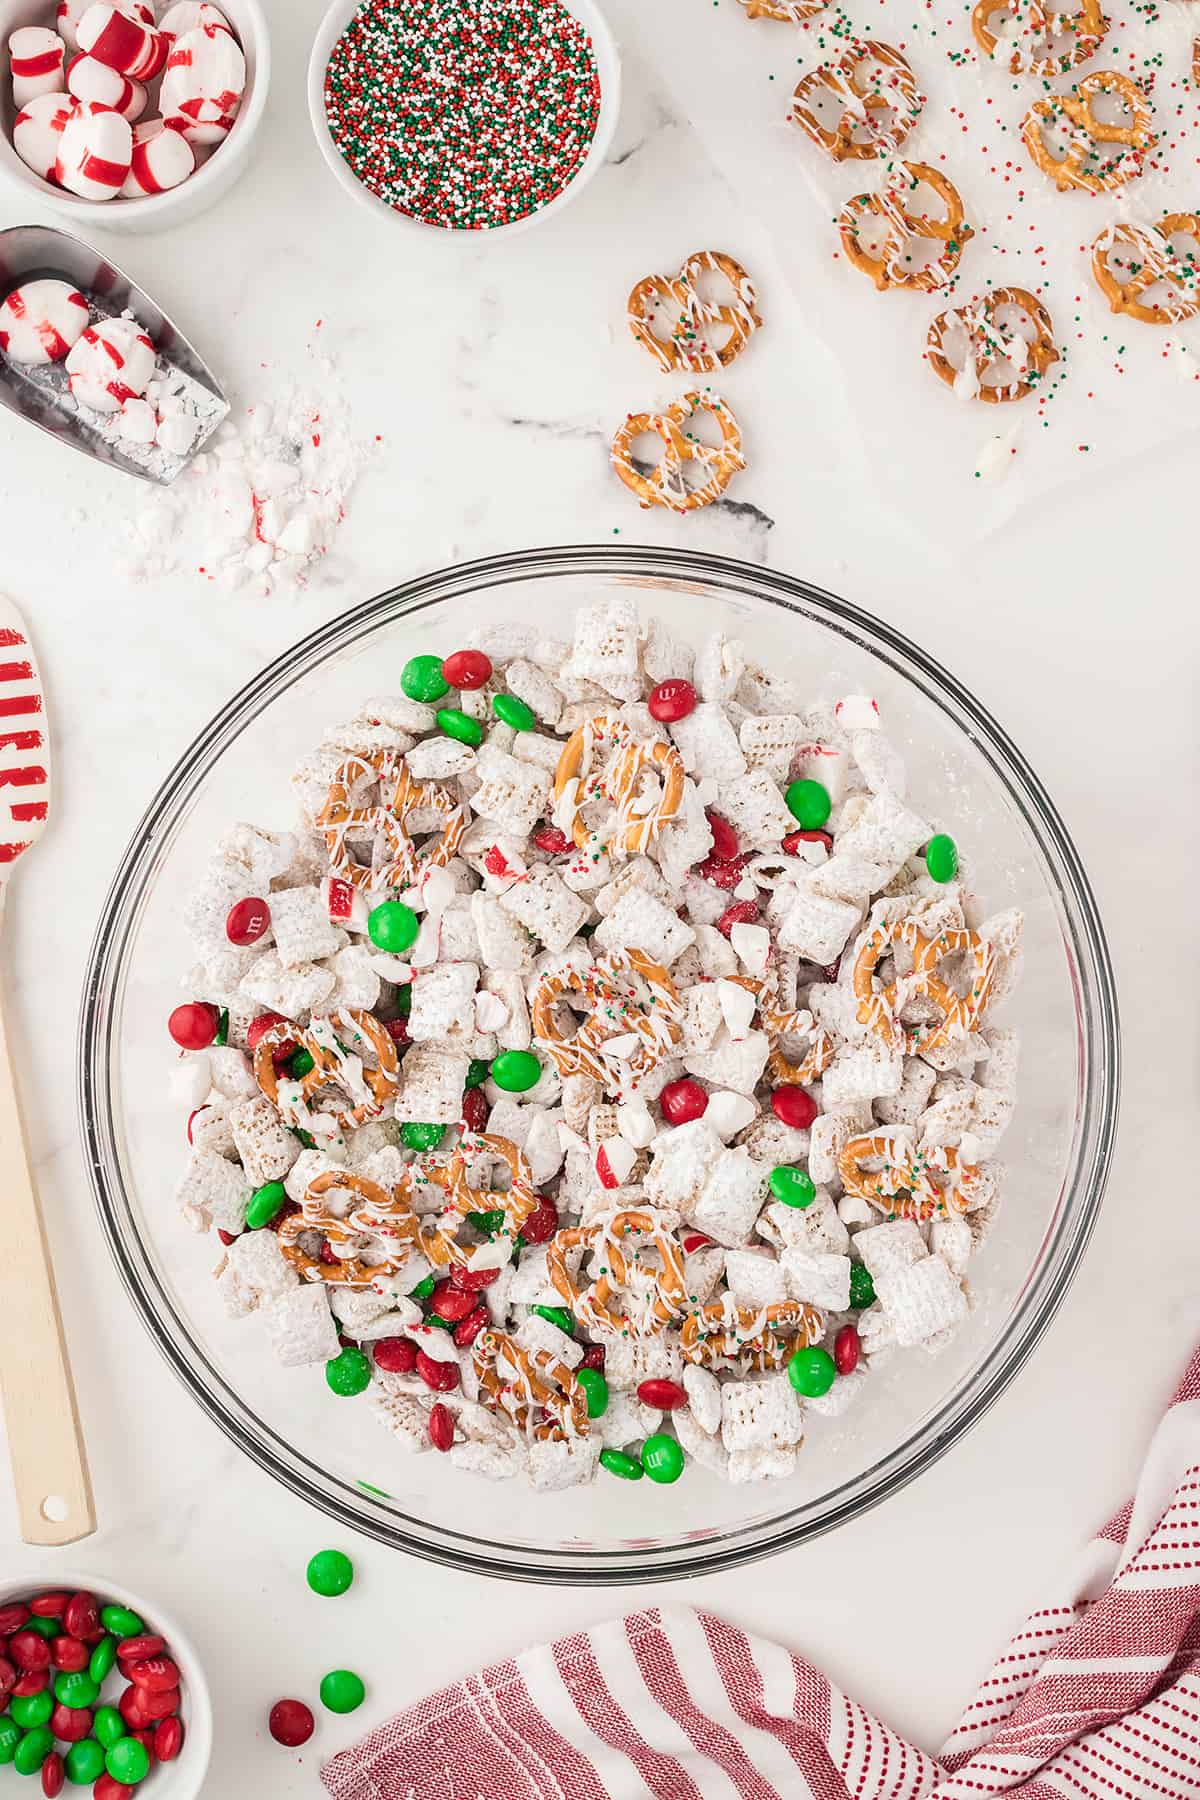 ingredients for holiday Chex mix in glass bowl.